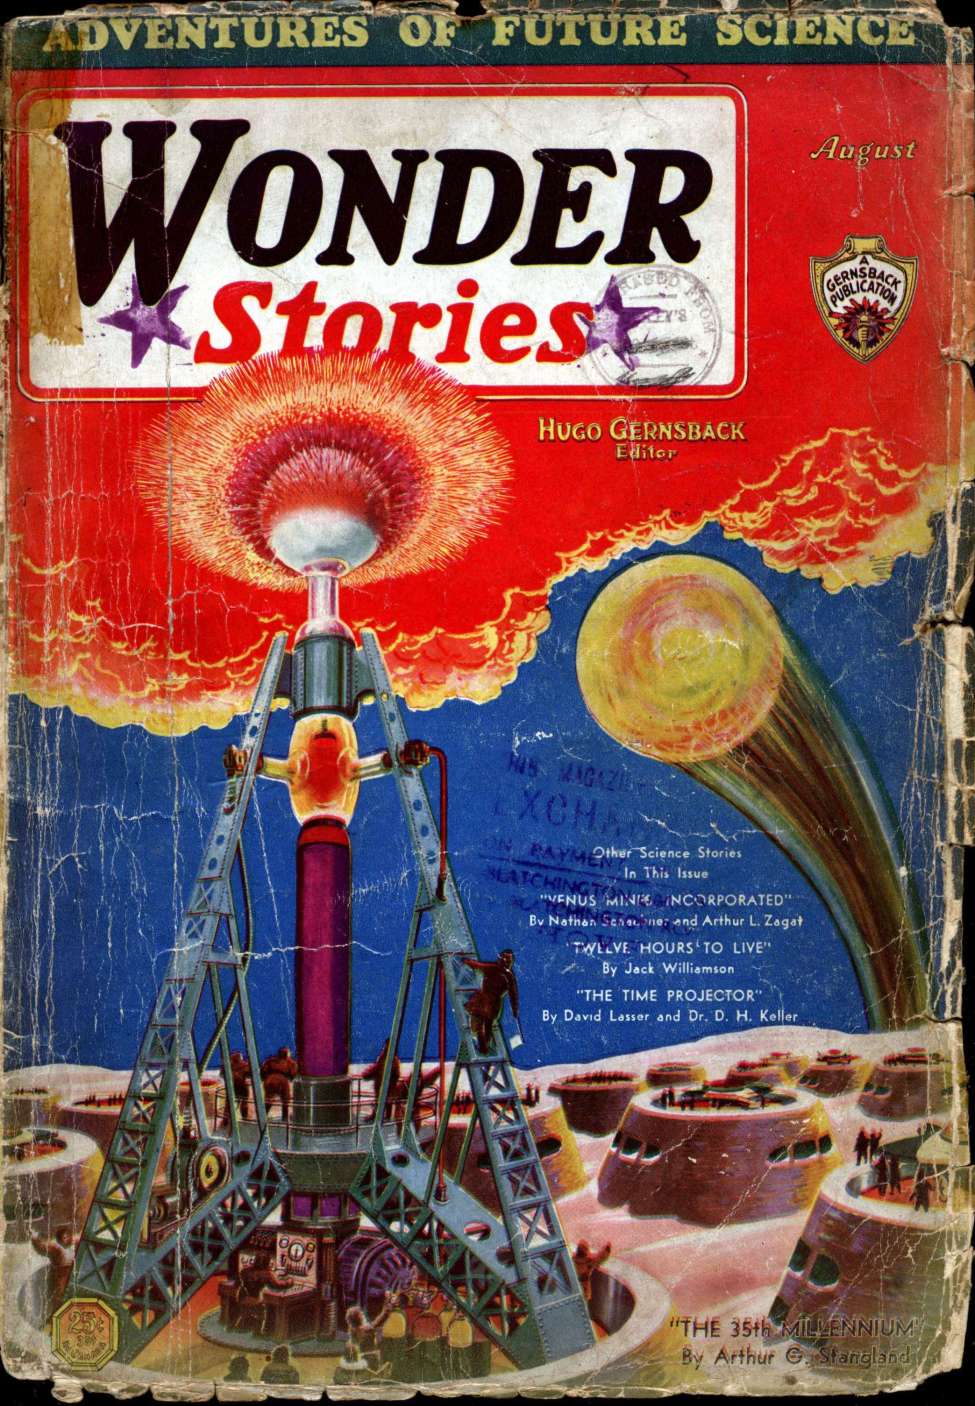 Comic Book Cover For Wonder Stories v3 3 - Venus Mines, Incorporated - Nat Schachner